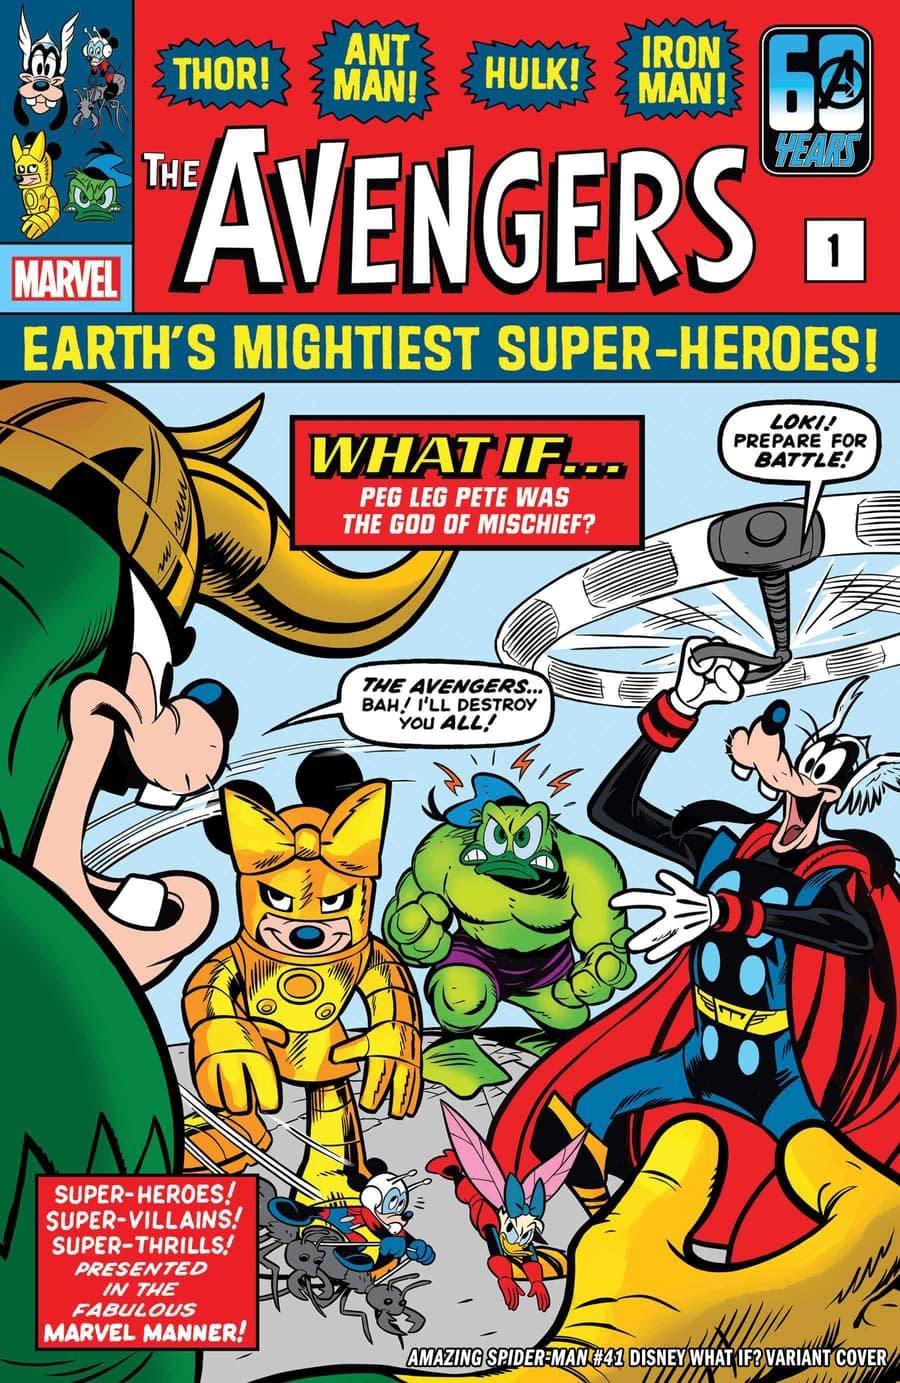 Disney Crossover with Marvel Comics to celebrate Avengers and X-Men - Avengers variant cover